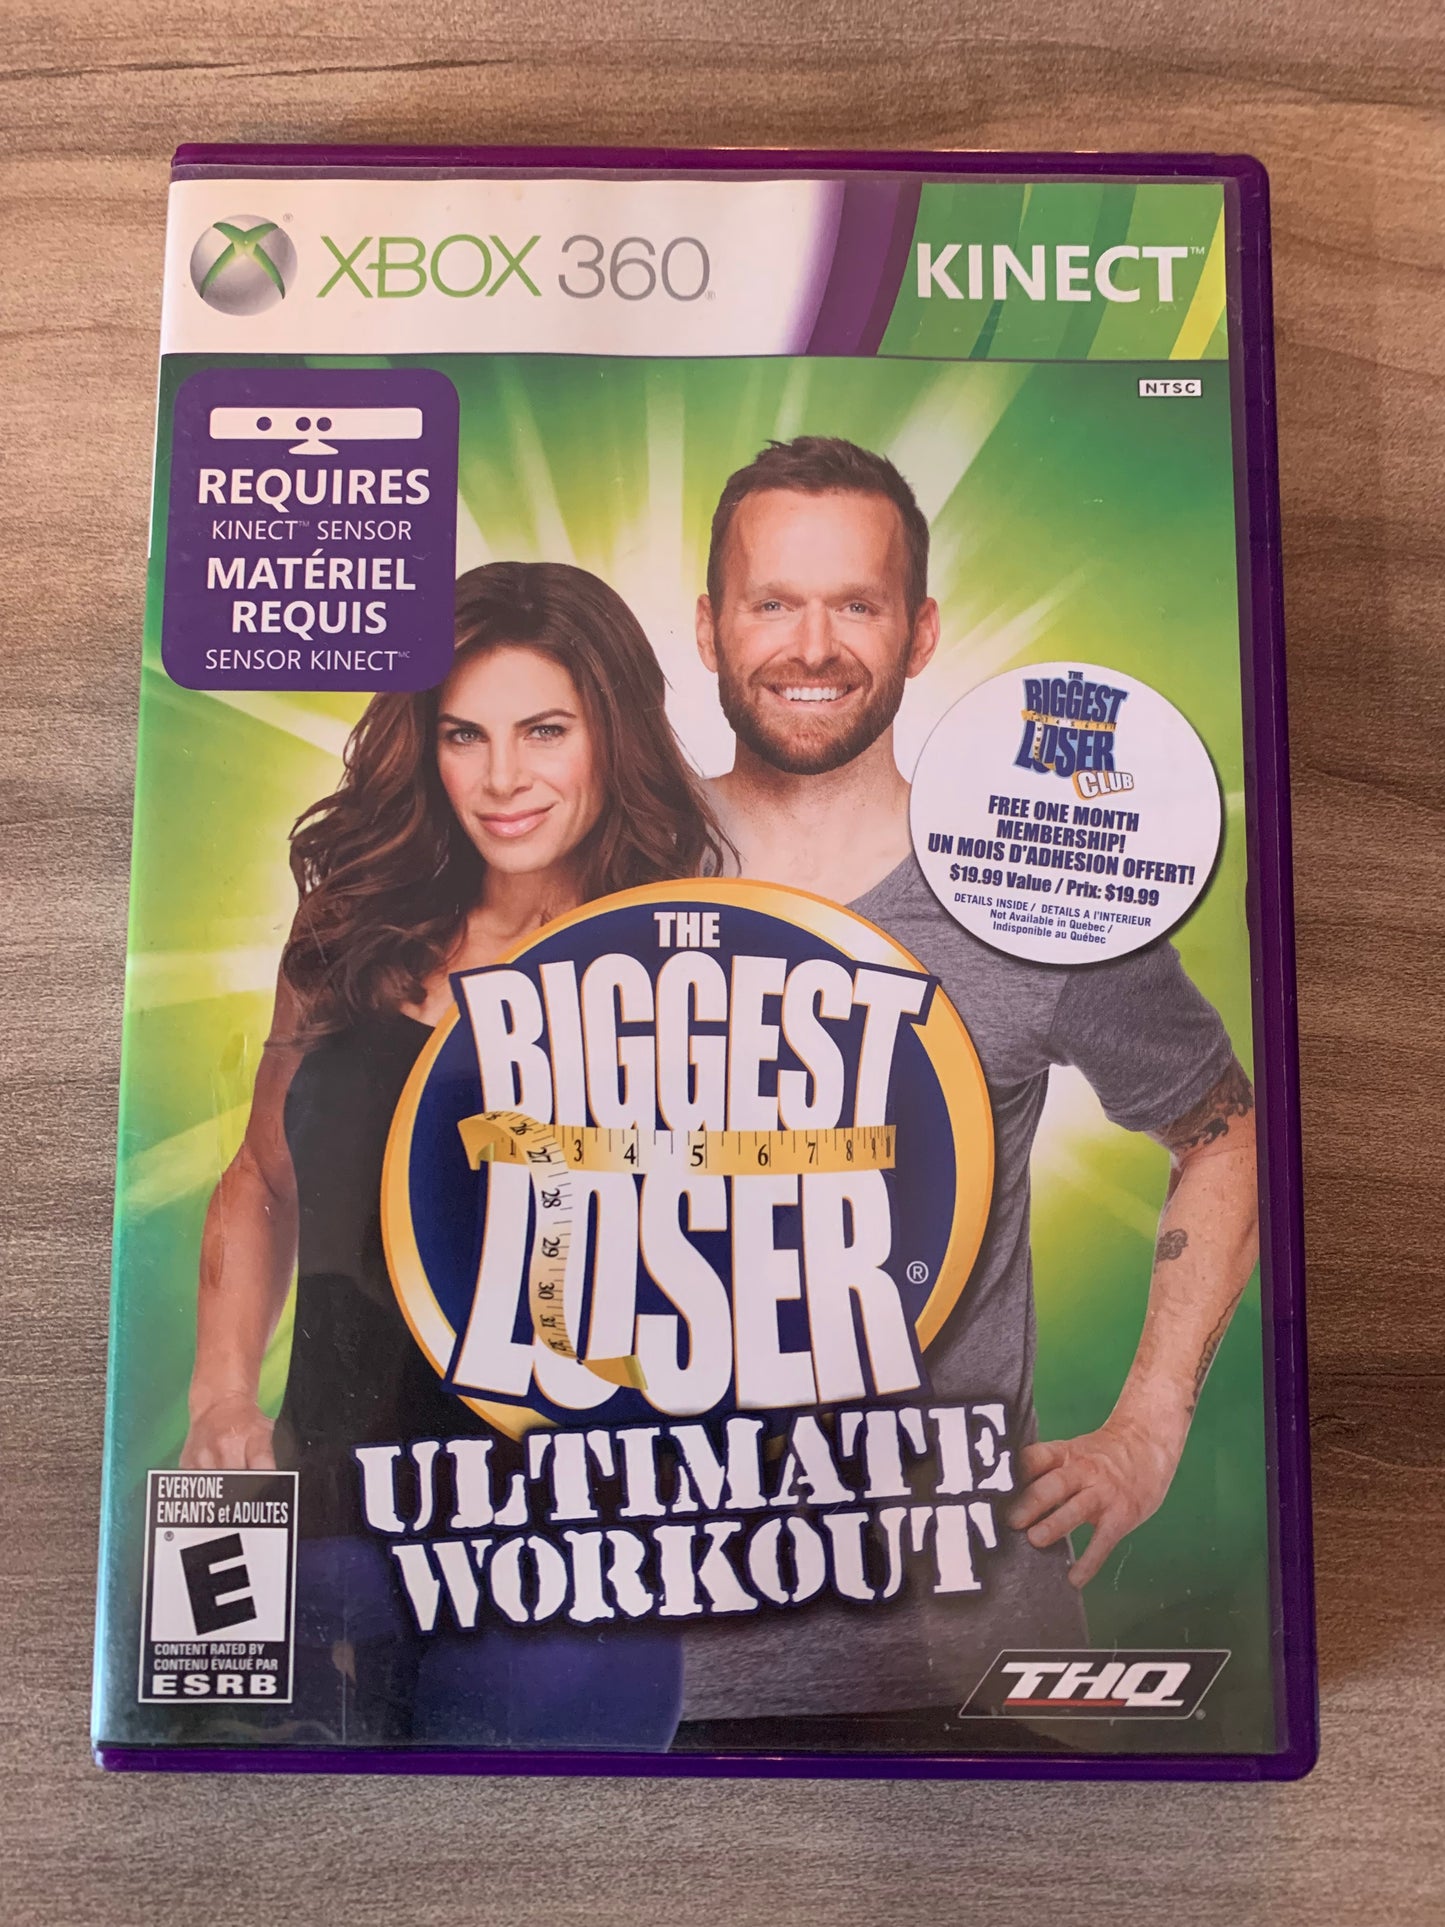 MiCROSOFT XBOX 360 | THE BiGGEST LOSER ULTiMATE WORKOUT